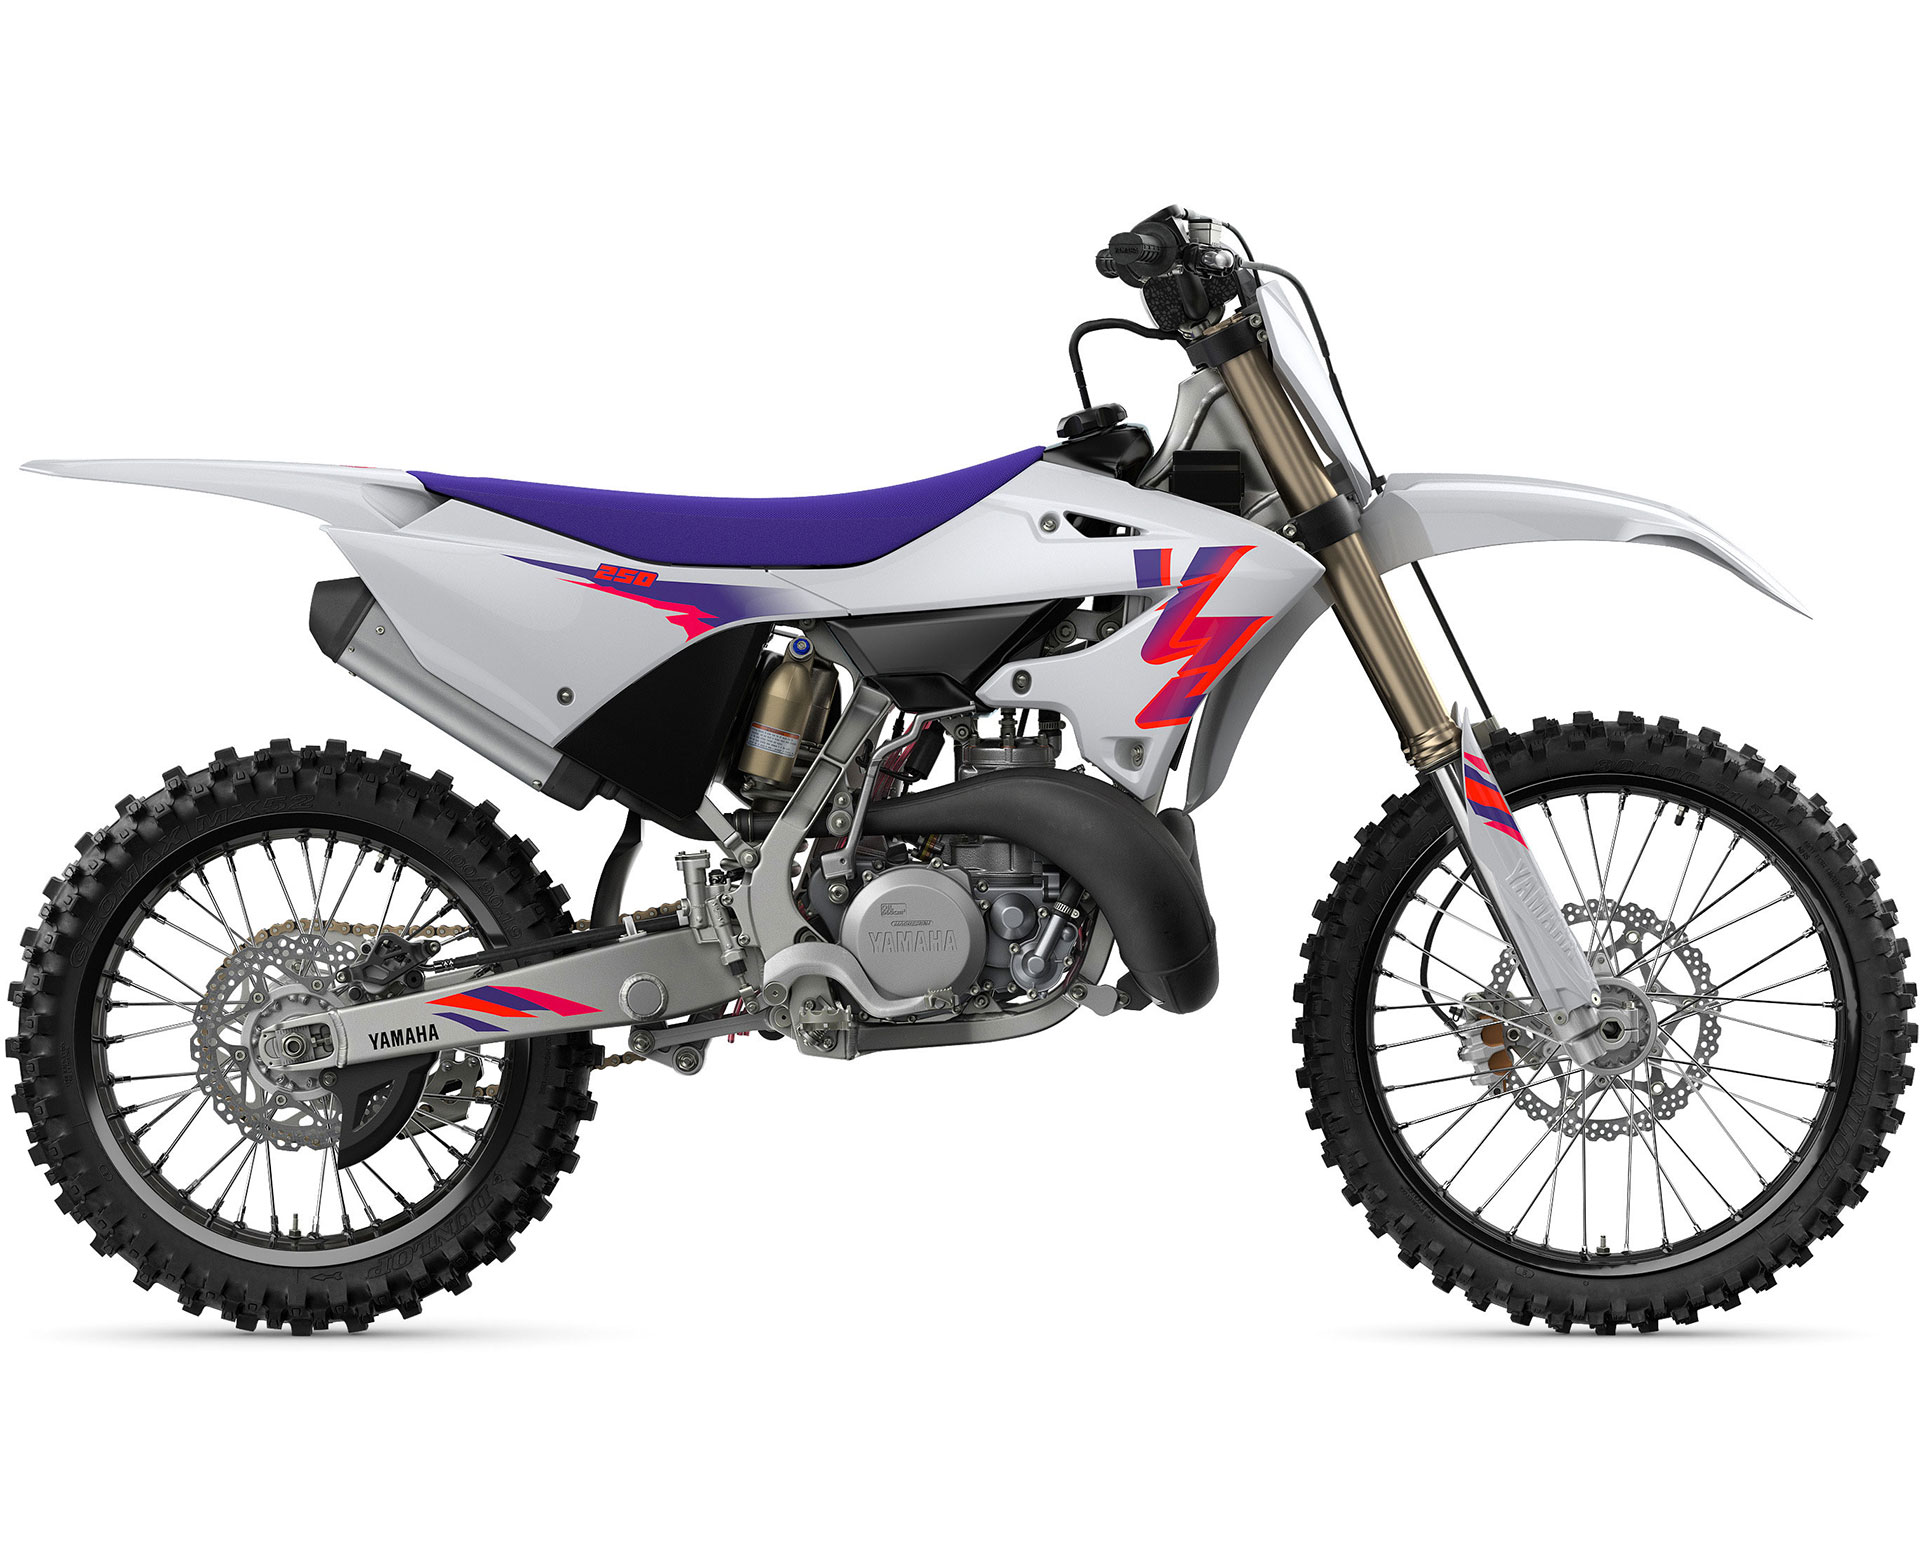 Thumbnail of your customized 2024 YZ250